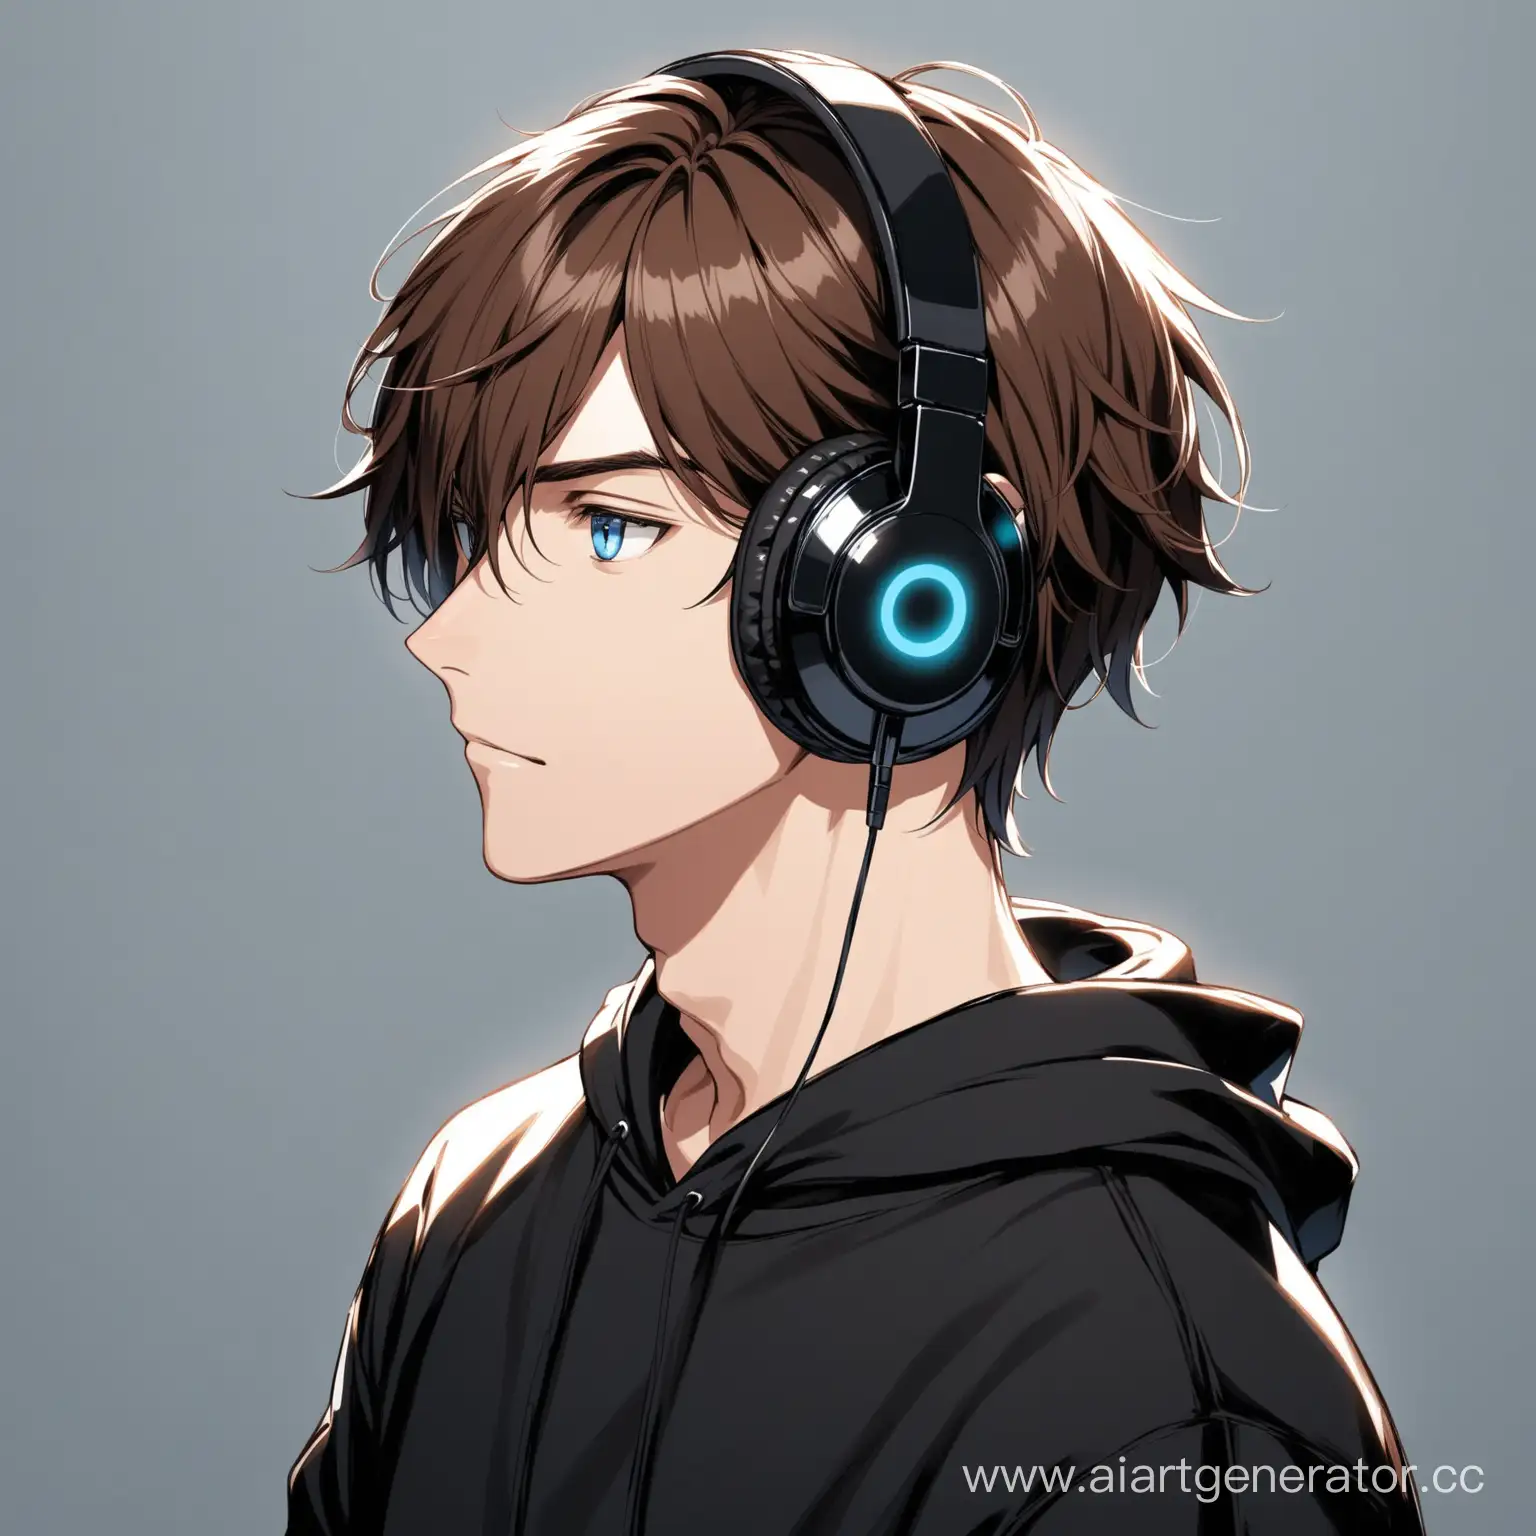 Stylish-Guy-with-Brown-Hair-and-Blue-Eyes-Wearing-Black-Sweatshirt-and-Headphones